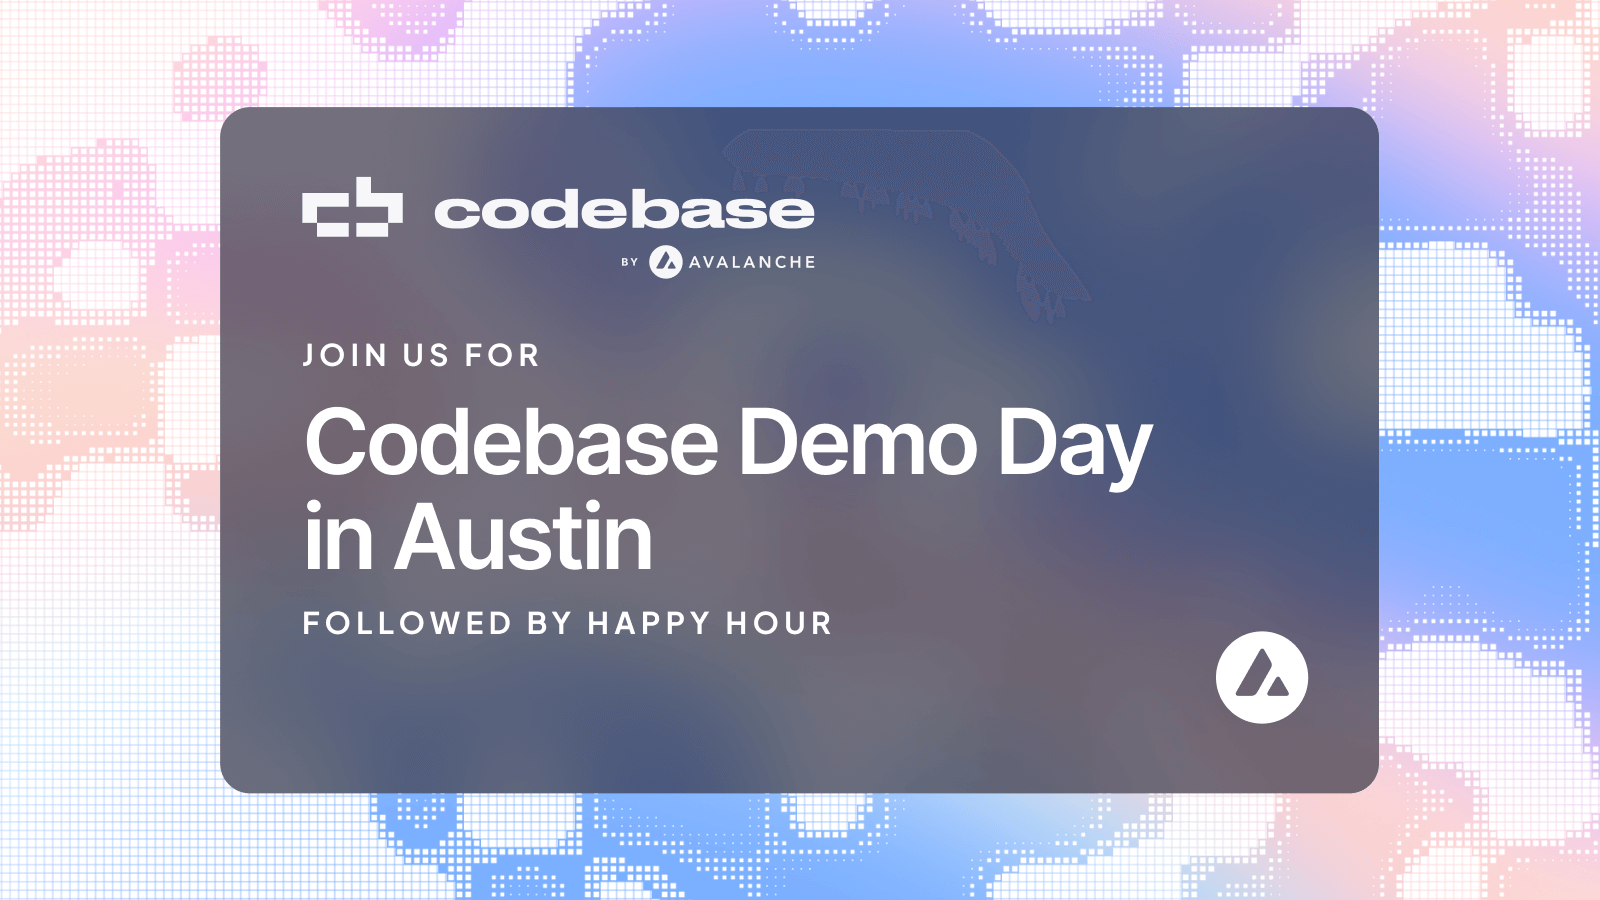 Codebase by Avalanche: Register for Demo Day